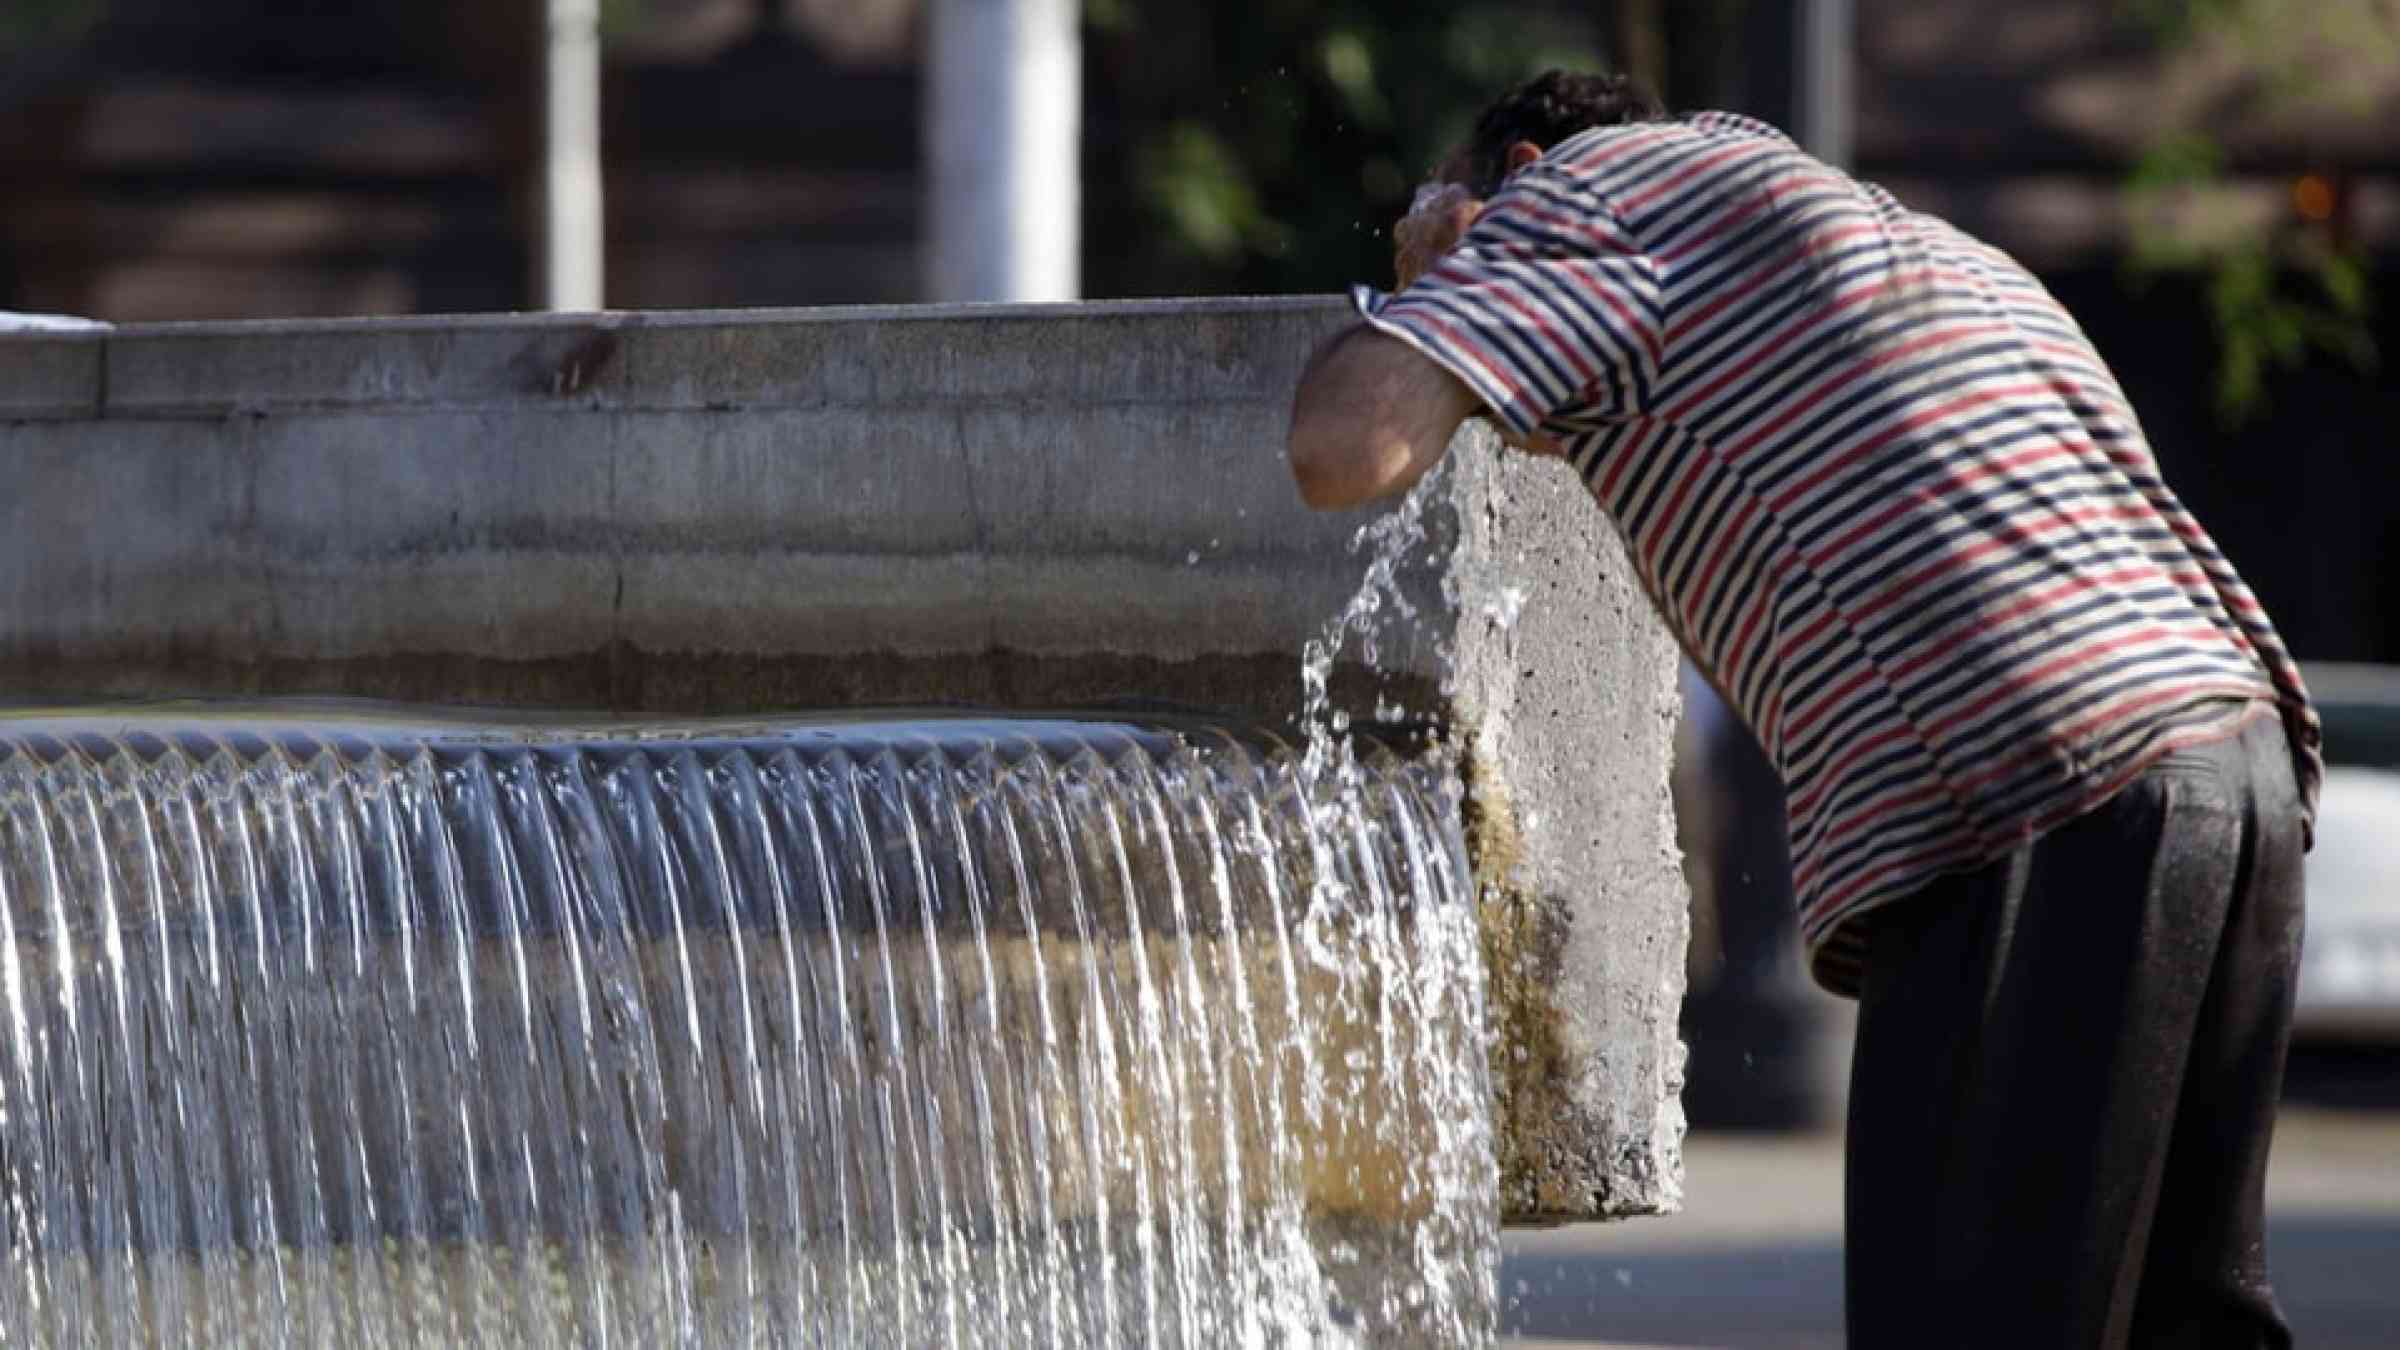 A homeless man washes himself in a public water fountain in Se square, downtown Sao Paulo, Brazil